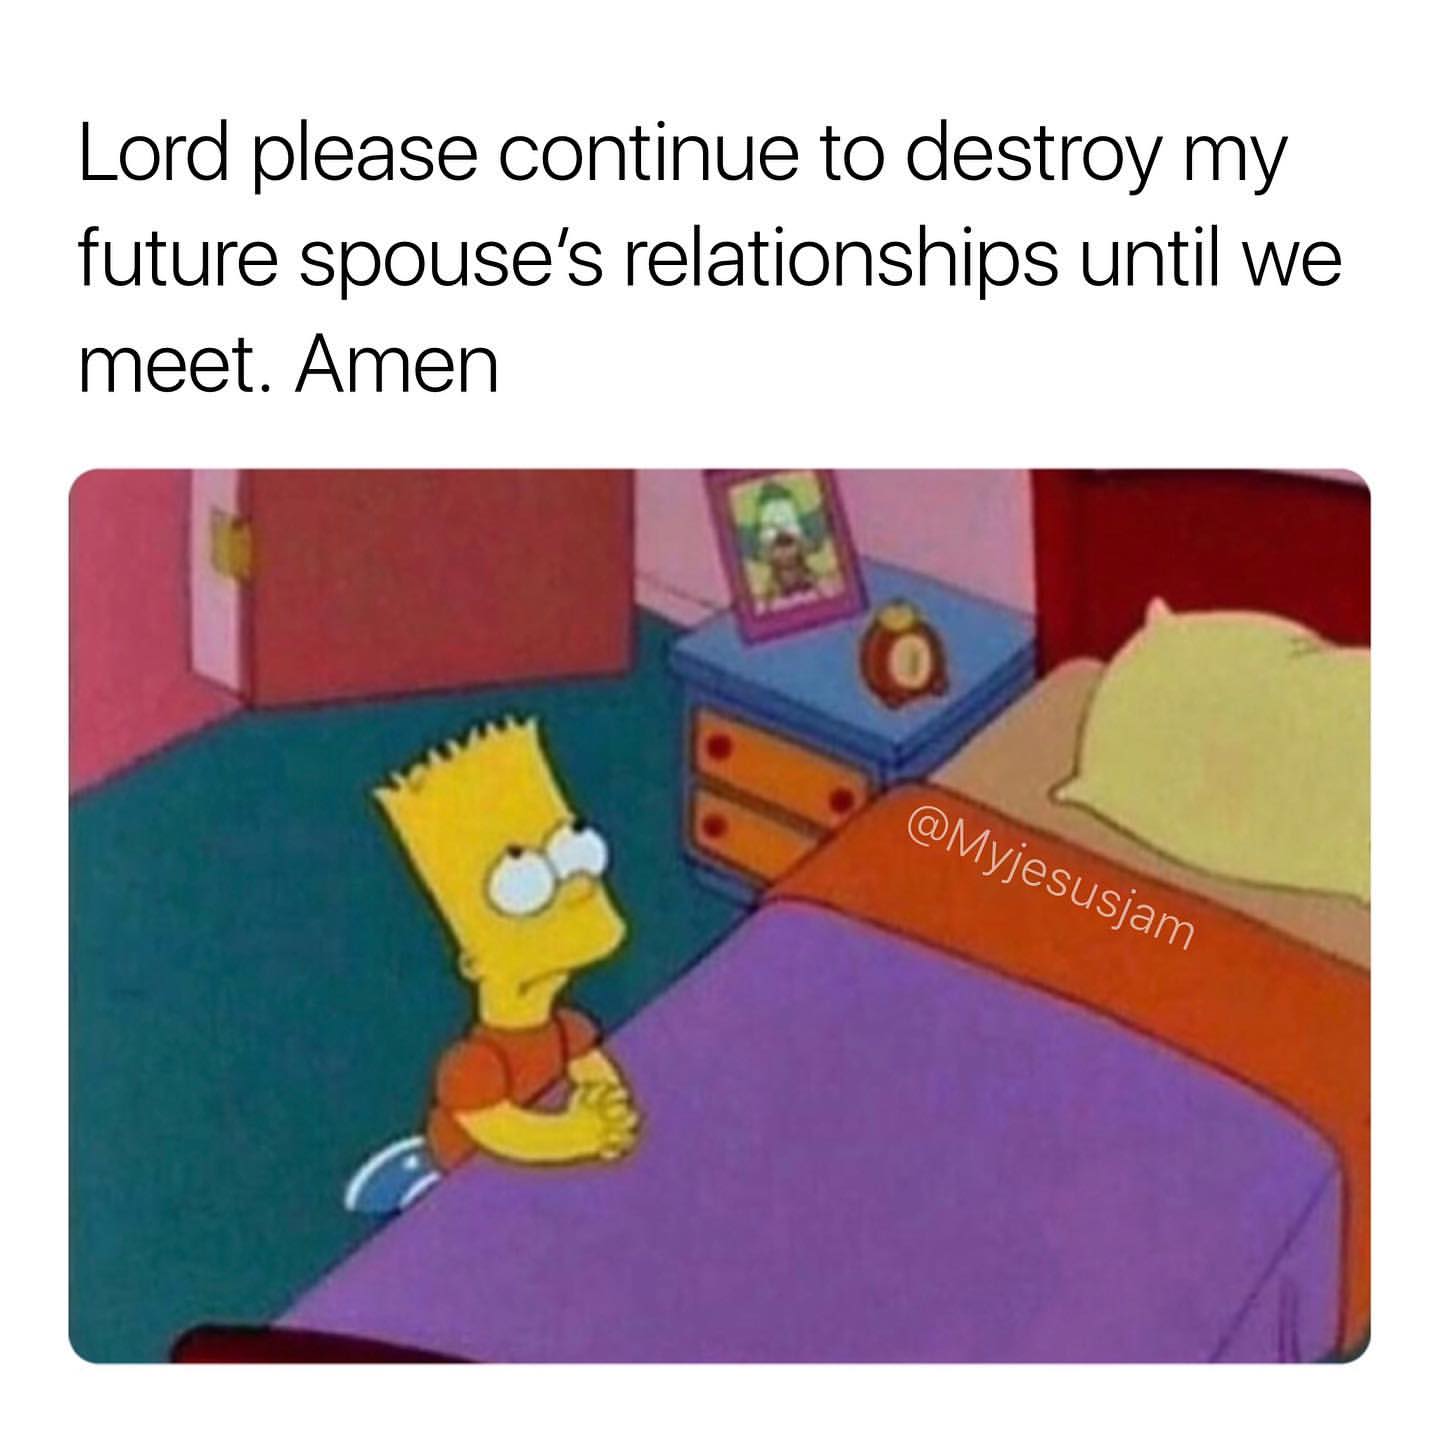 Lord please continue to destroy my future spouse's relationships until we meet. Amen.